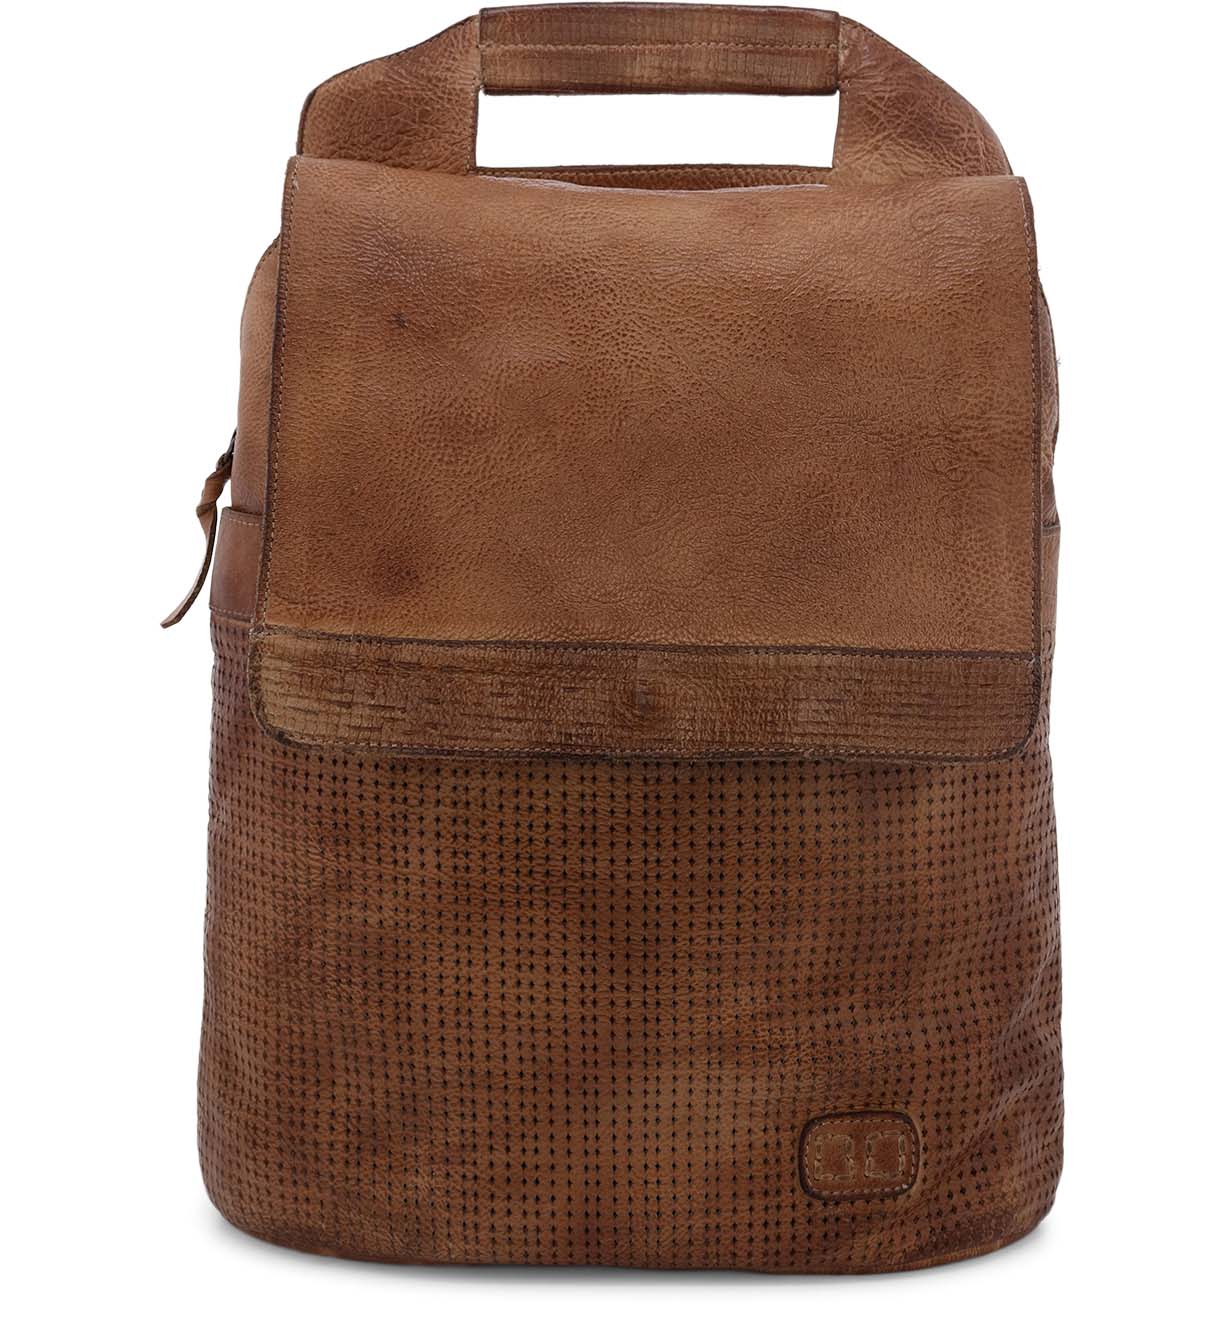 A brown leather Patsy backpack with a handle by Bed Stu.